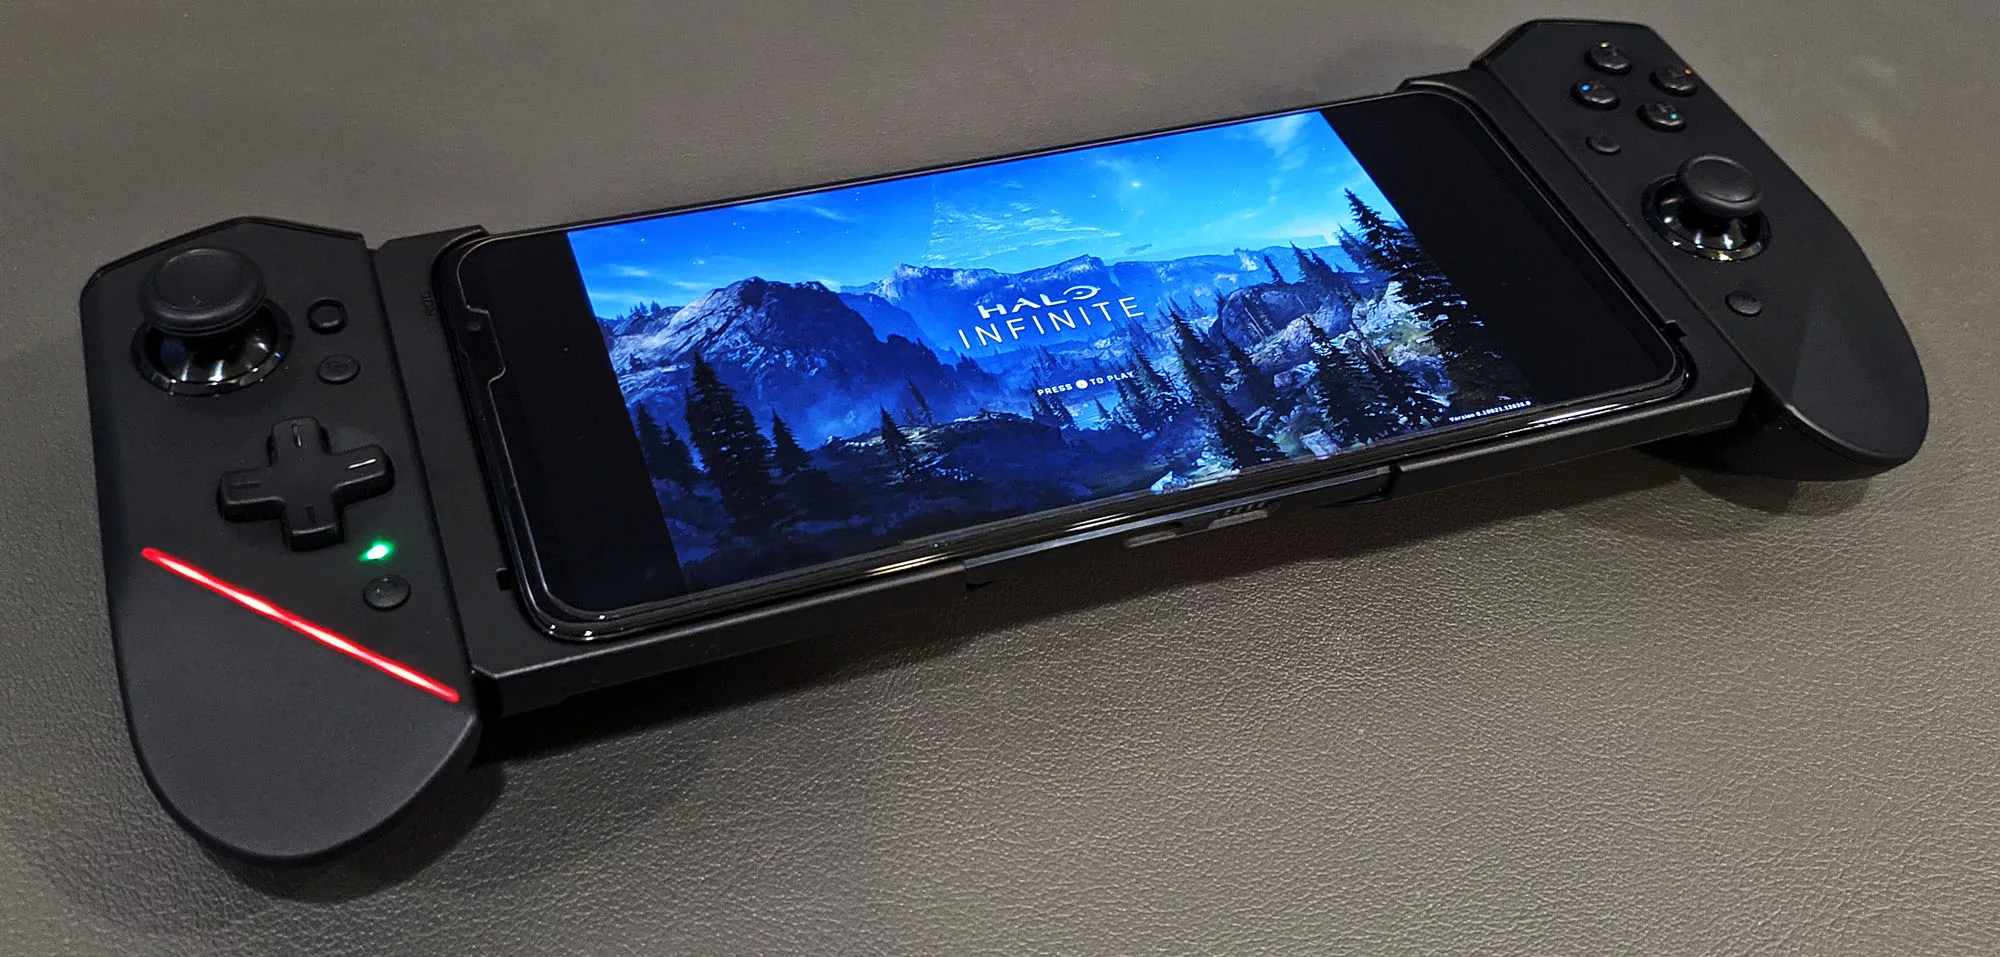 An ROG Phone 5s connected to the ROG Kunai gamepad, showing the Halo Infinite title screen.